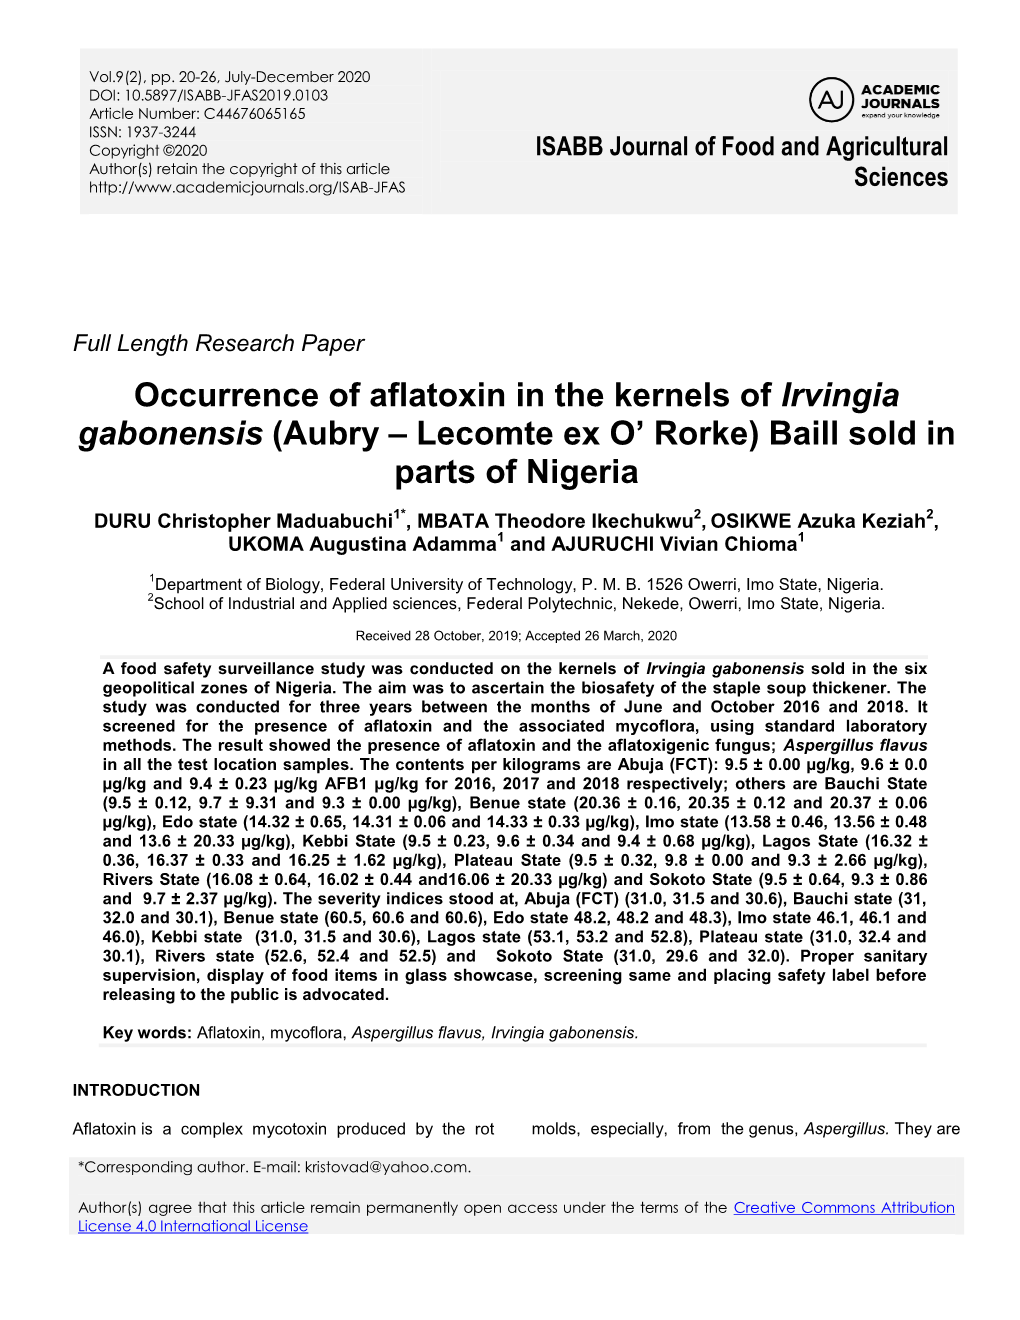 Occurrence of Aflatoxin in the Kernels of Irvingia Gabonensis (Aubry – Lecomte Ex O’ Rorke) Baill Sold in Parts of Nigeria